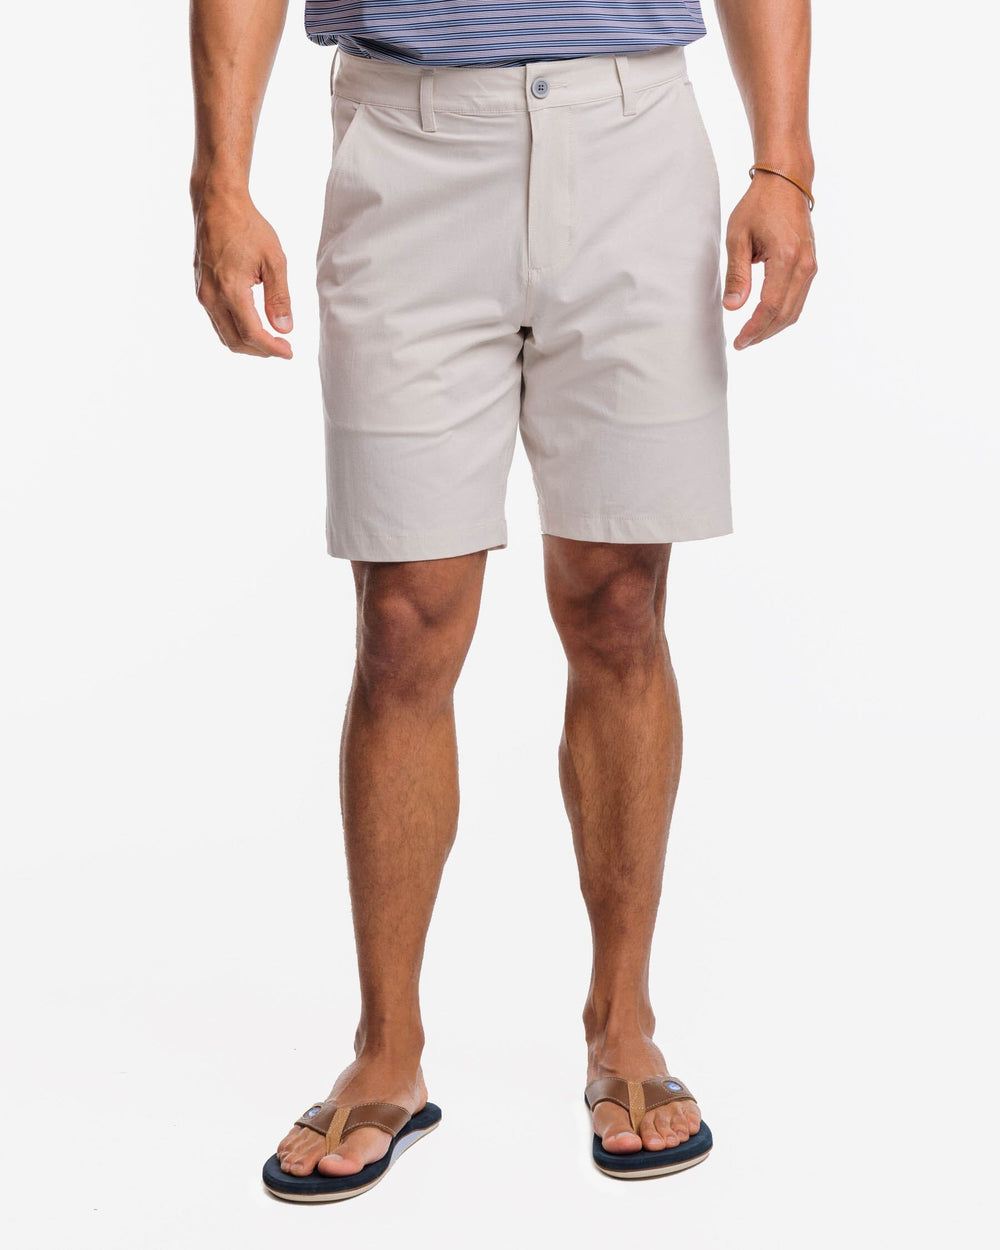 The front view of the Southern Tide T3 Gulf 9 Inch Performance Short by Southern Tide - Stone